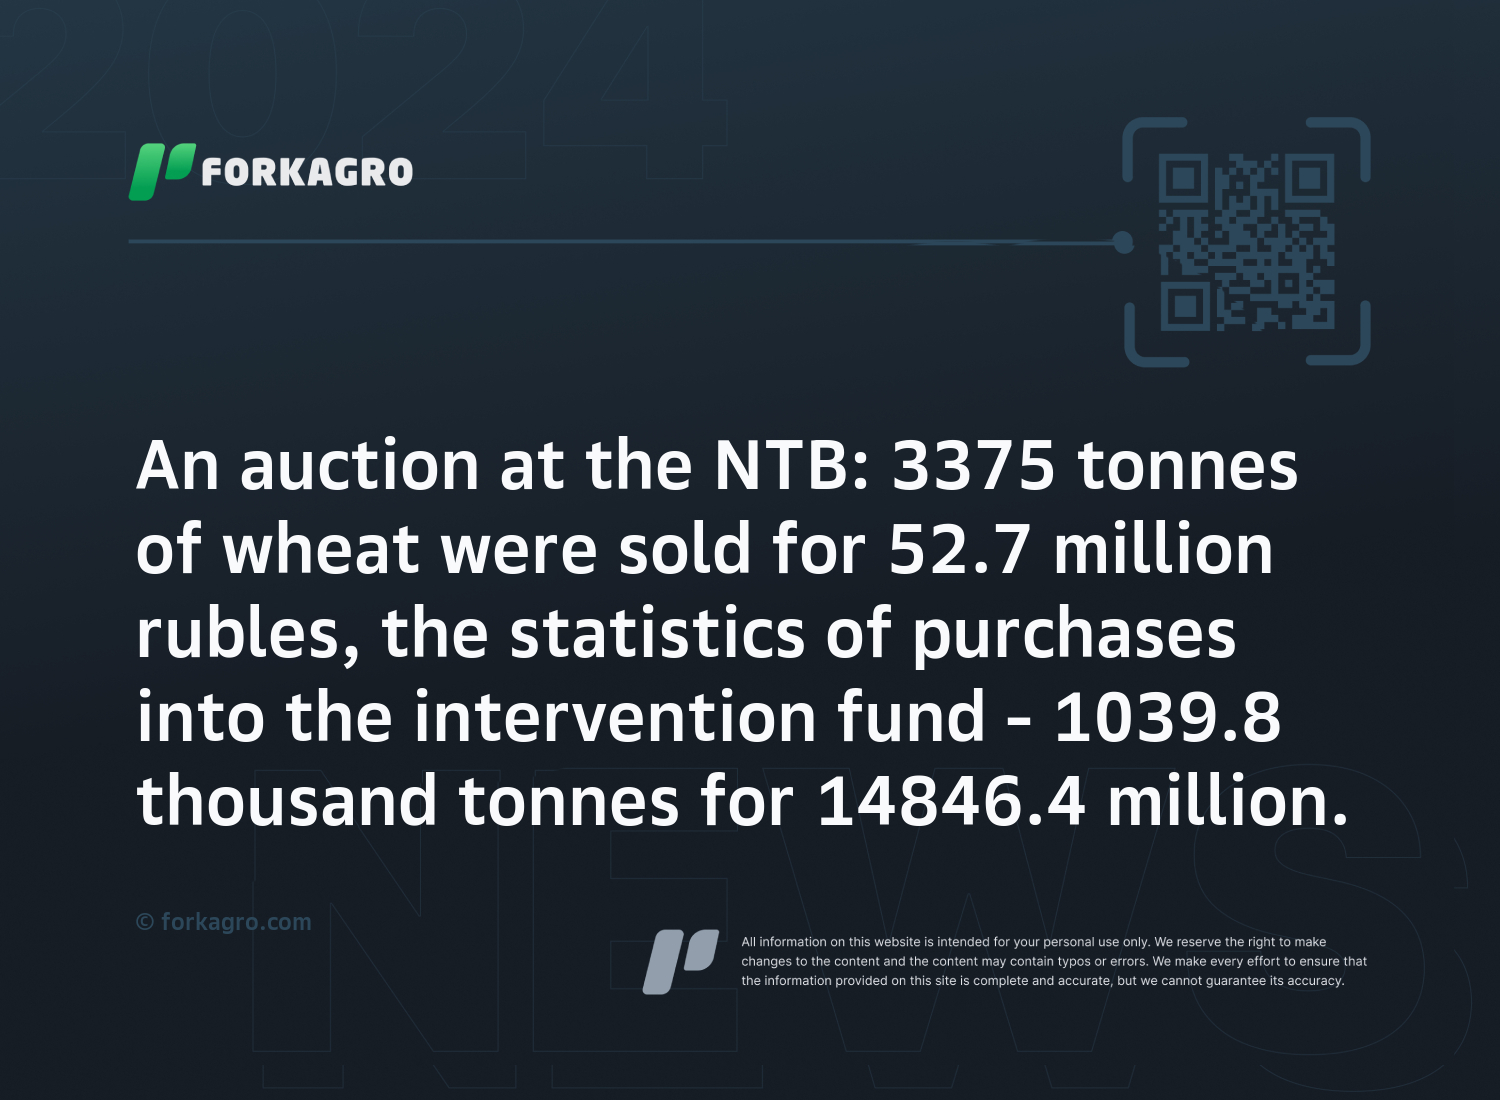 An auction at the NTB: 3375 tonnes of wheat were sold for 52.7 million rubles, the statistics of purchases into the intervention fund - 1039.8 thousand tonnes for 14846.4 million.